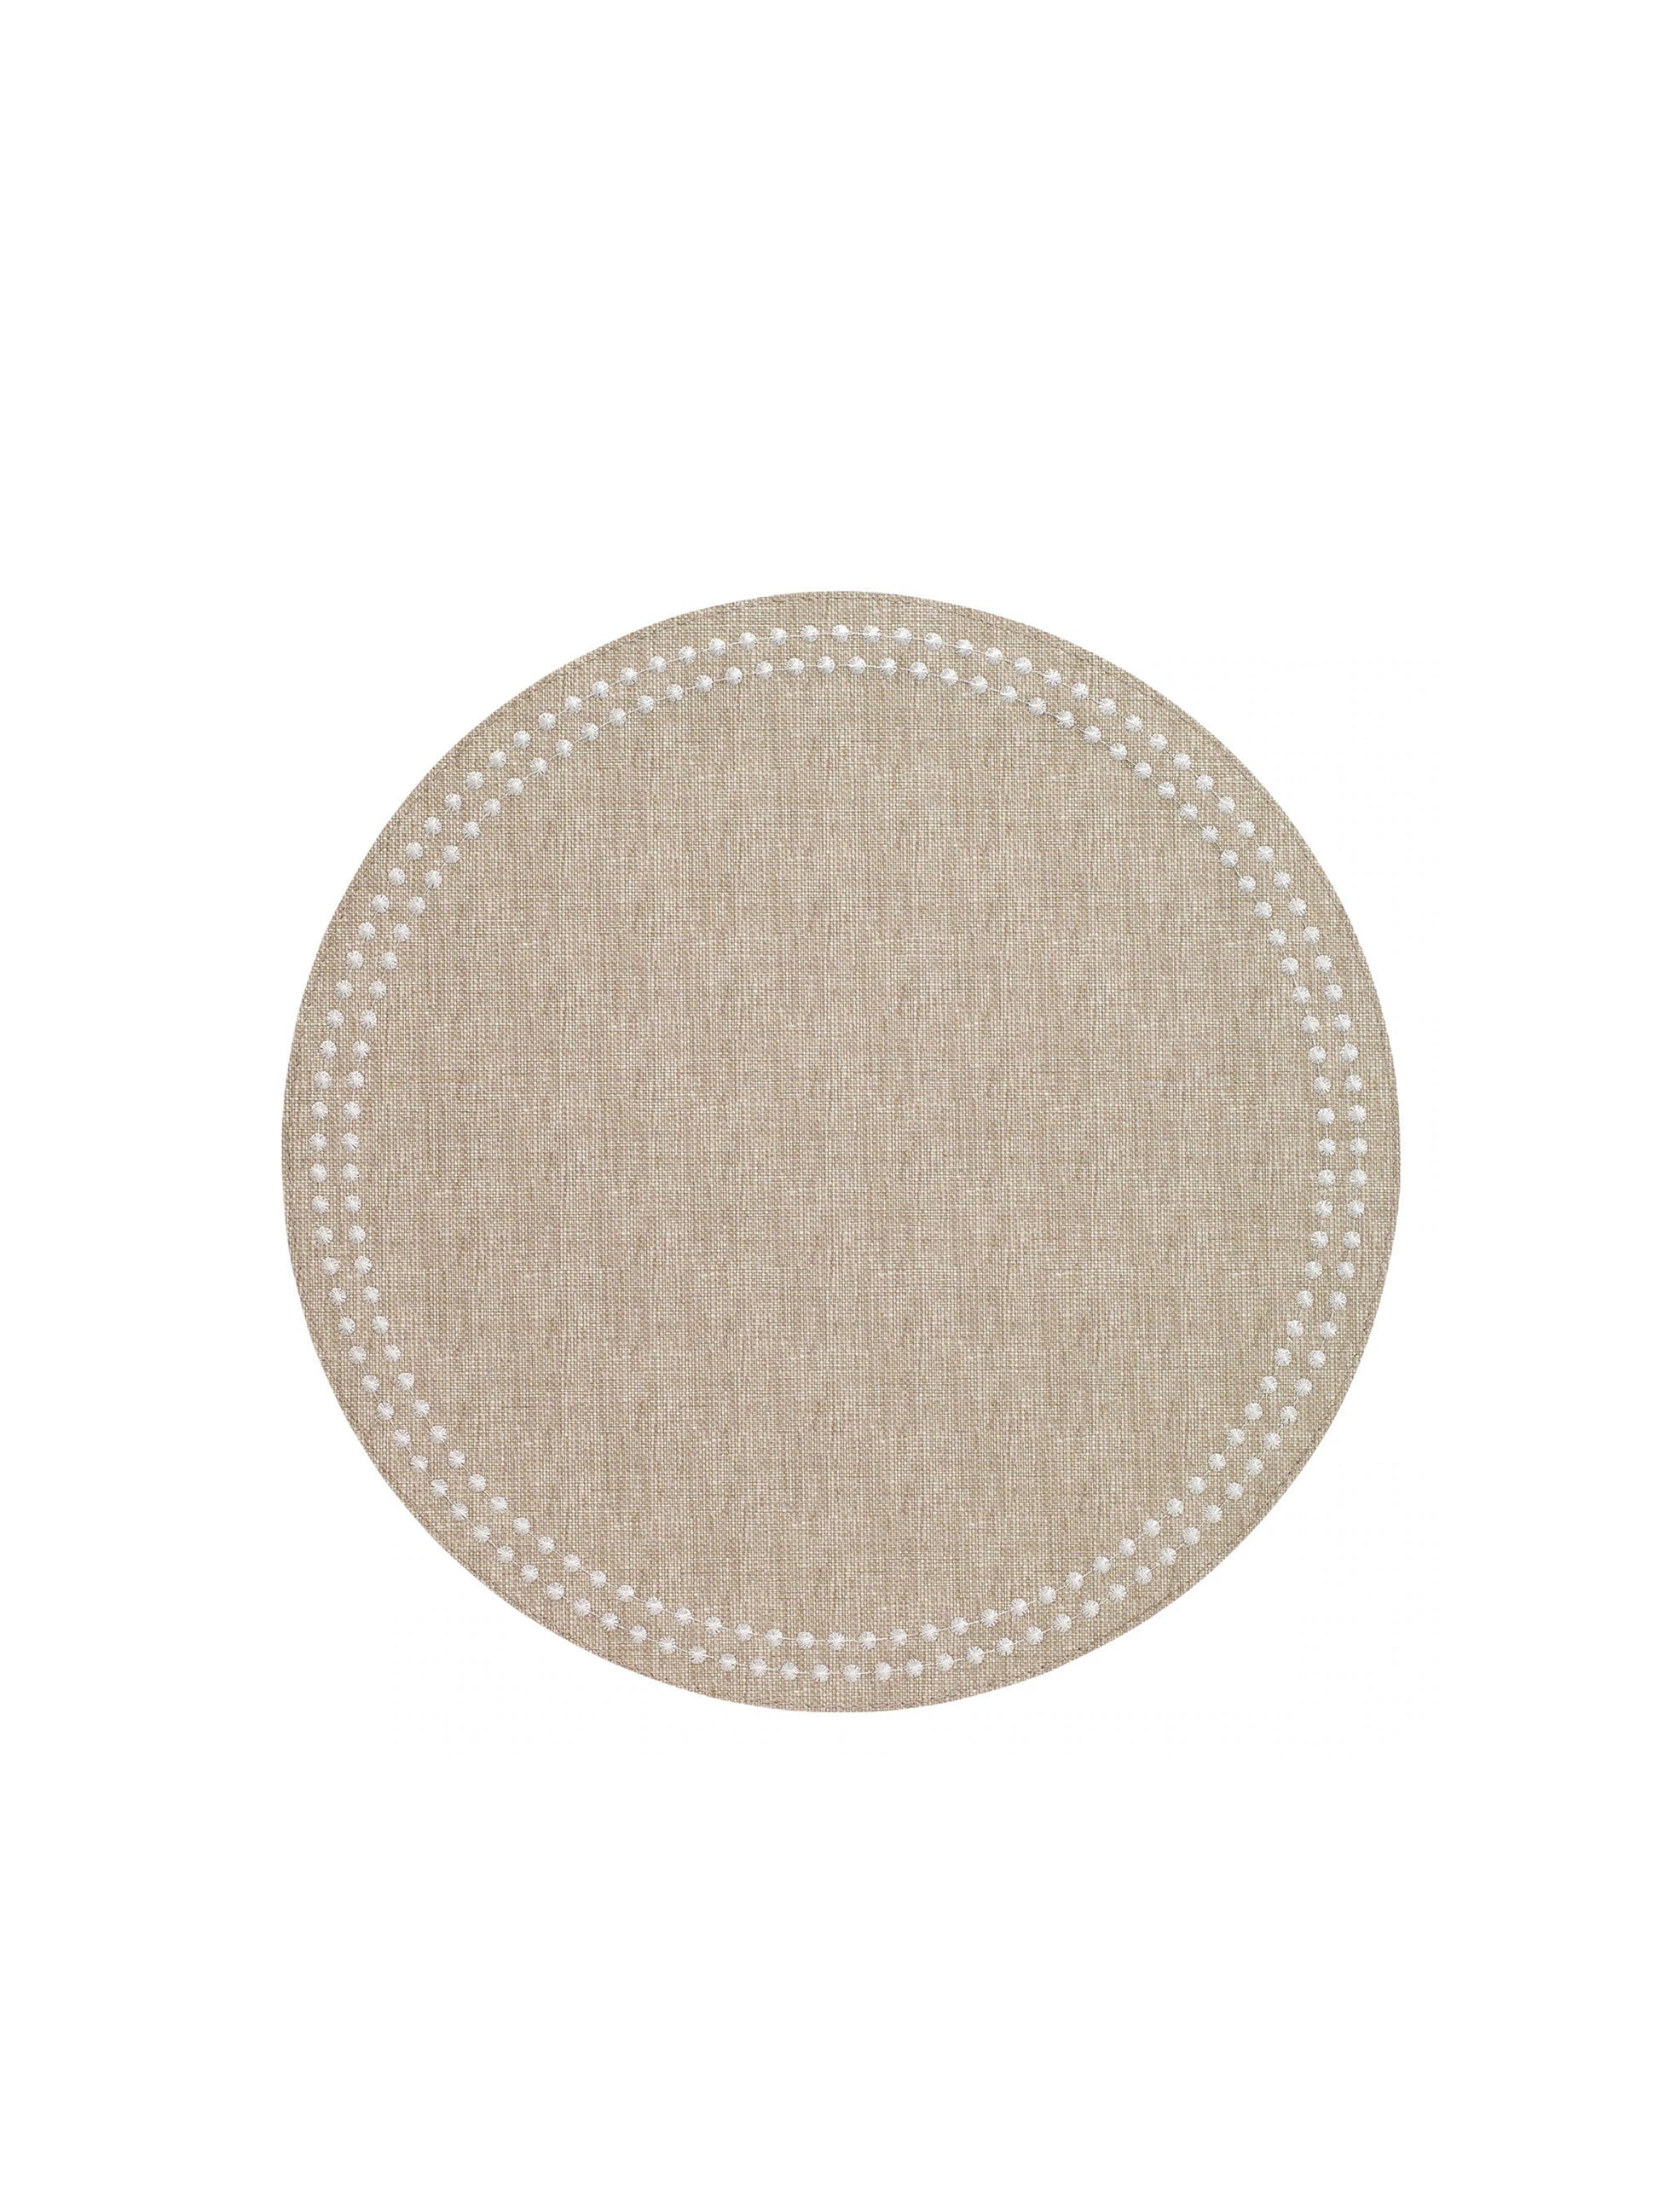 Bodrum Pearls Placemats Beige and White WestonTable